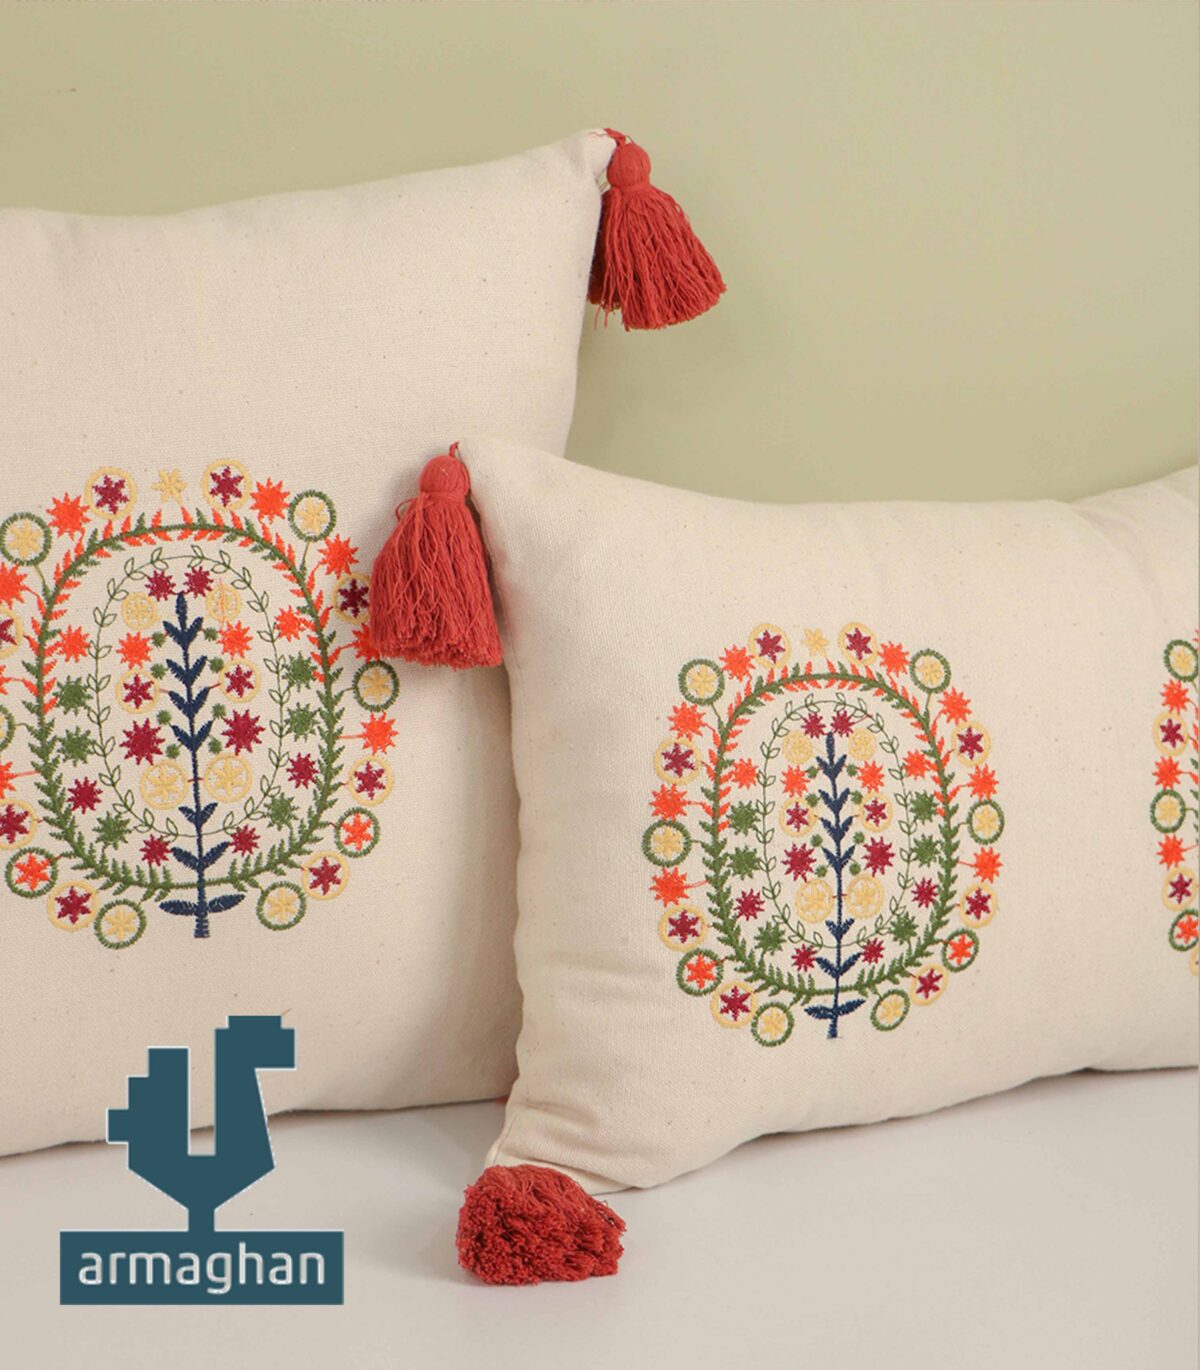 Buy an embroidered cushion close-up2